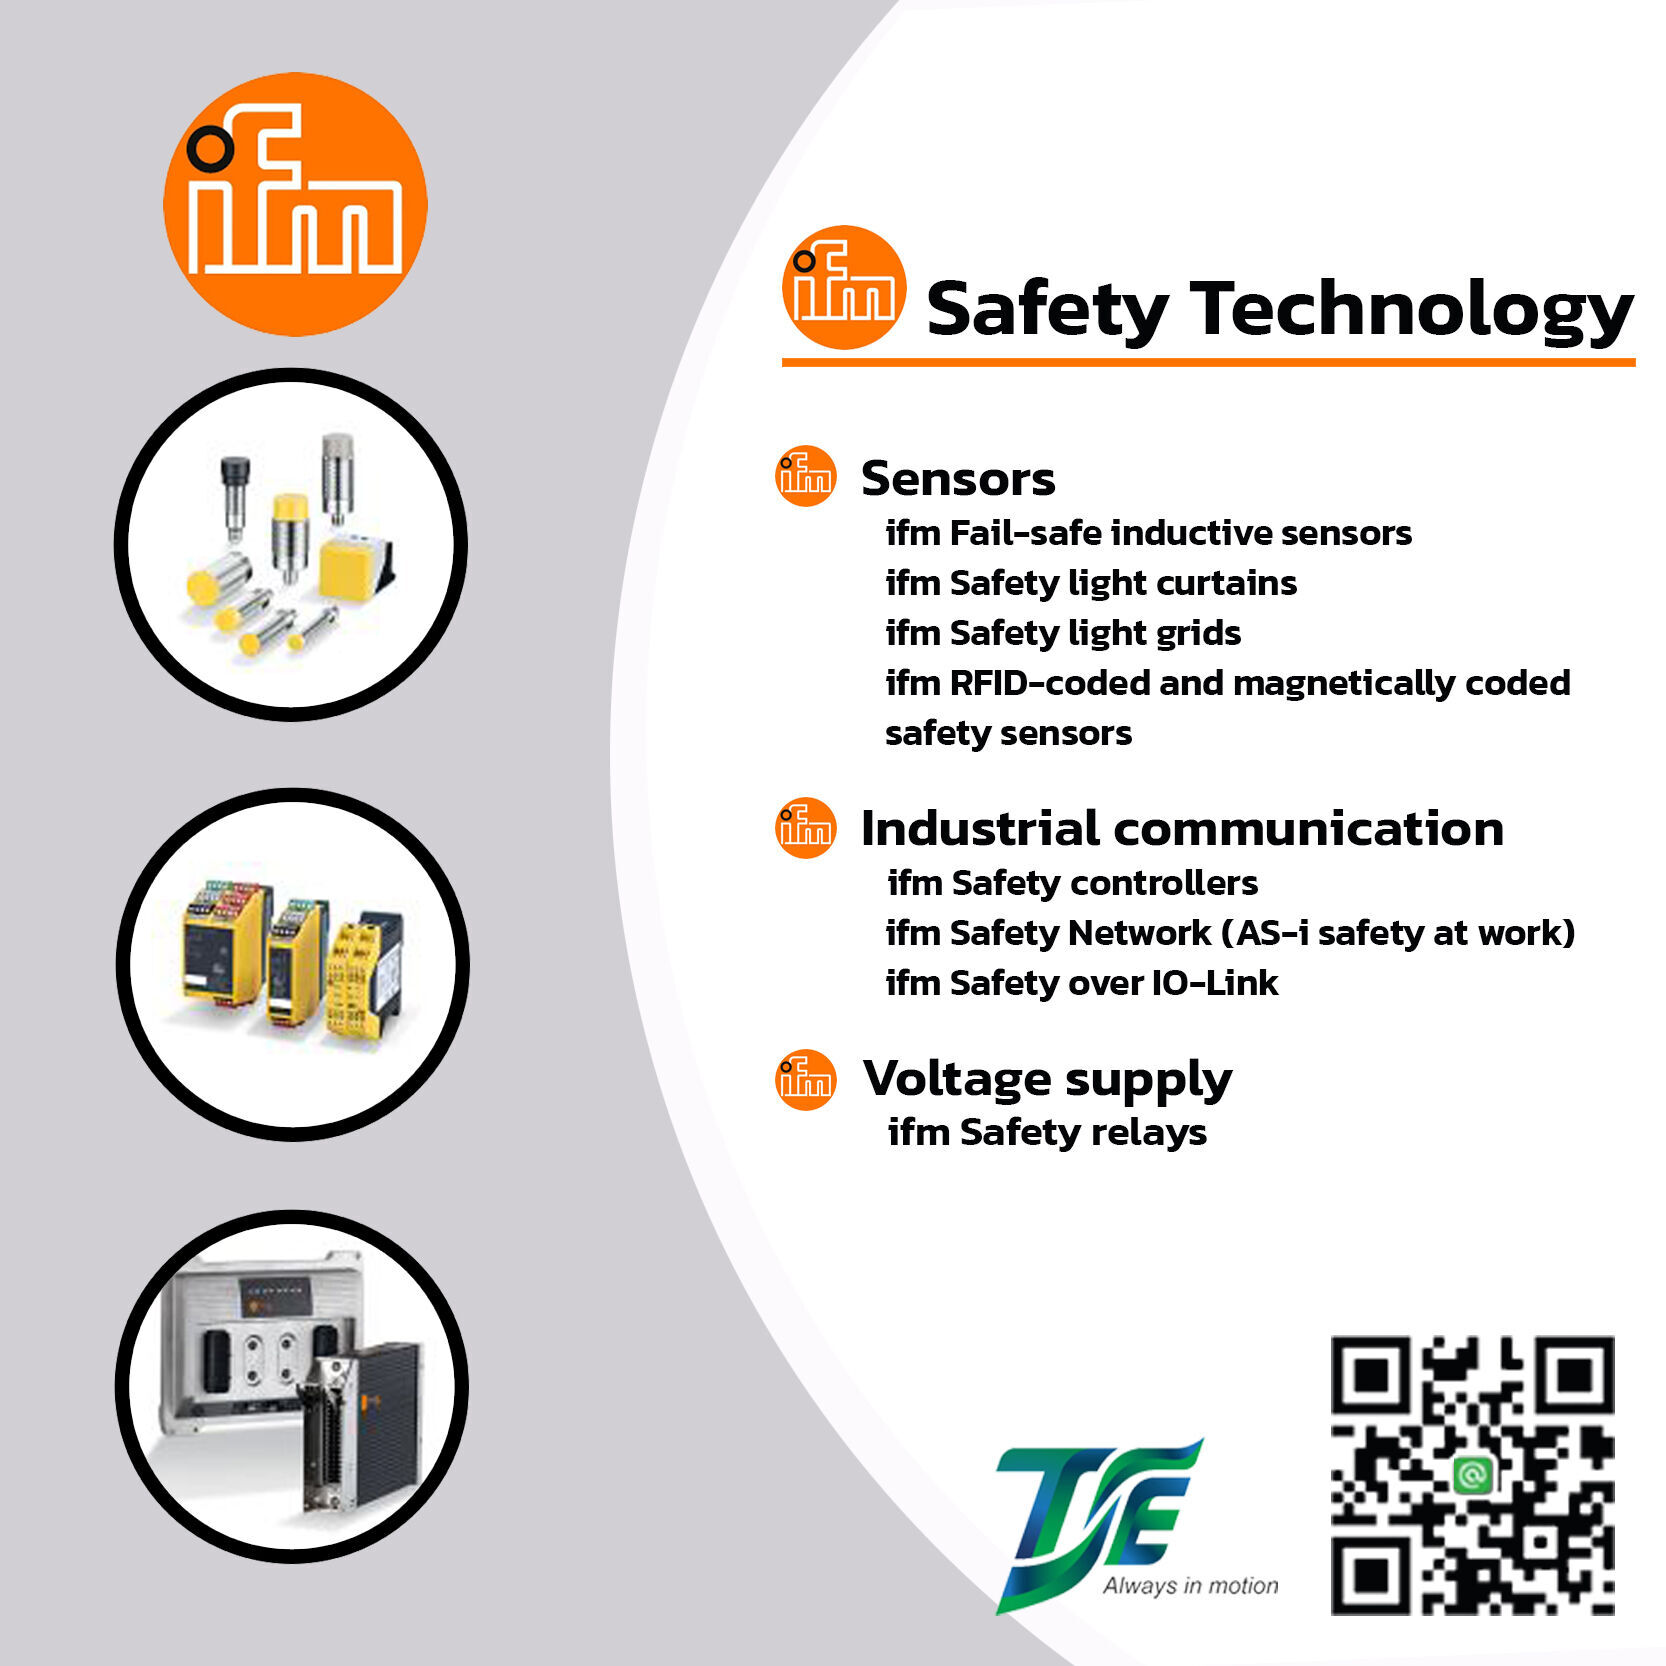 Sensors
ifm Fail-safe inductive sensors
ifm Safety light curtains
ifm Safety light grids
ifm RFID-coded and magnetically coded
safety sensors
Industrial communication
ifm Safety con